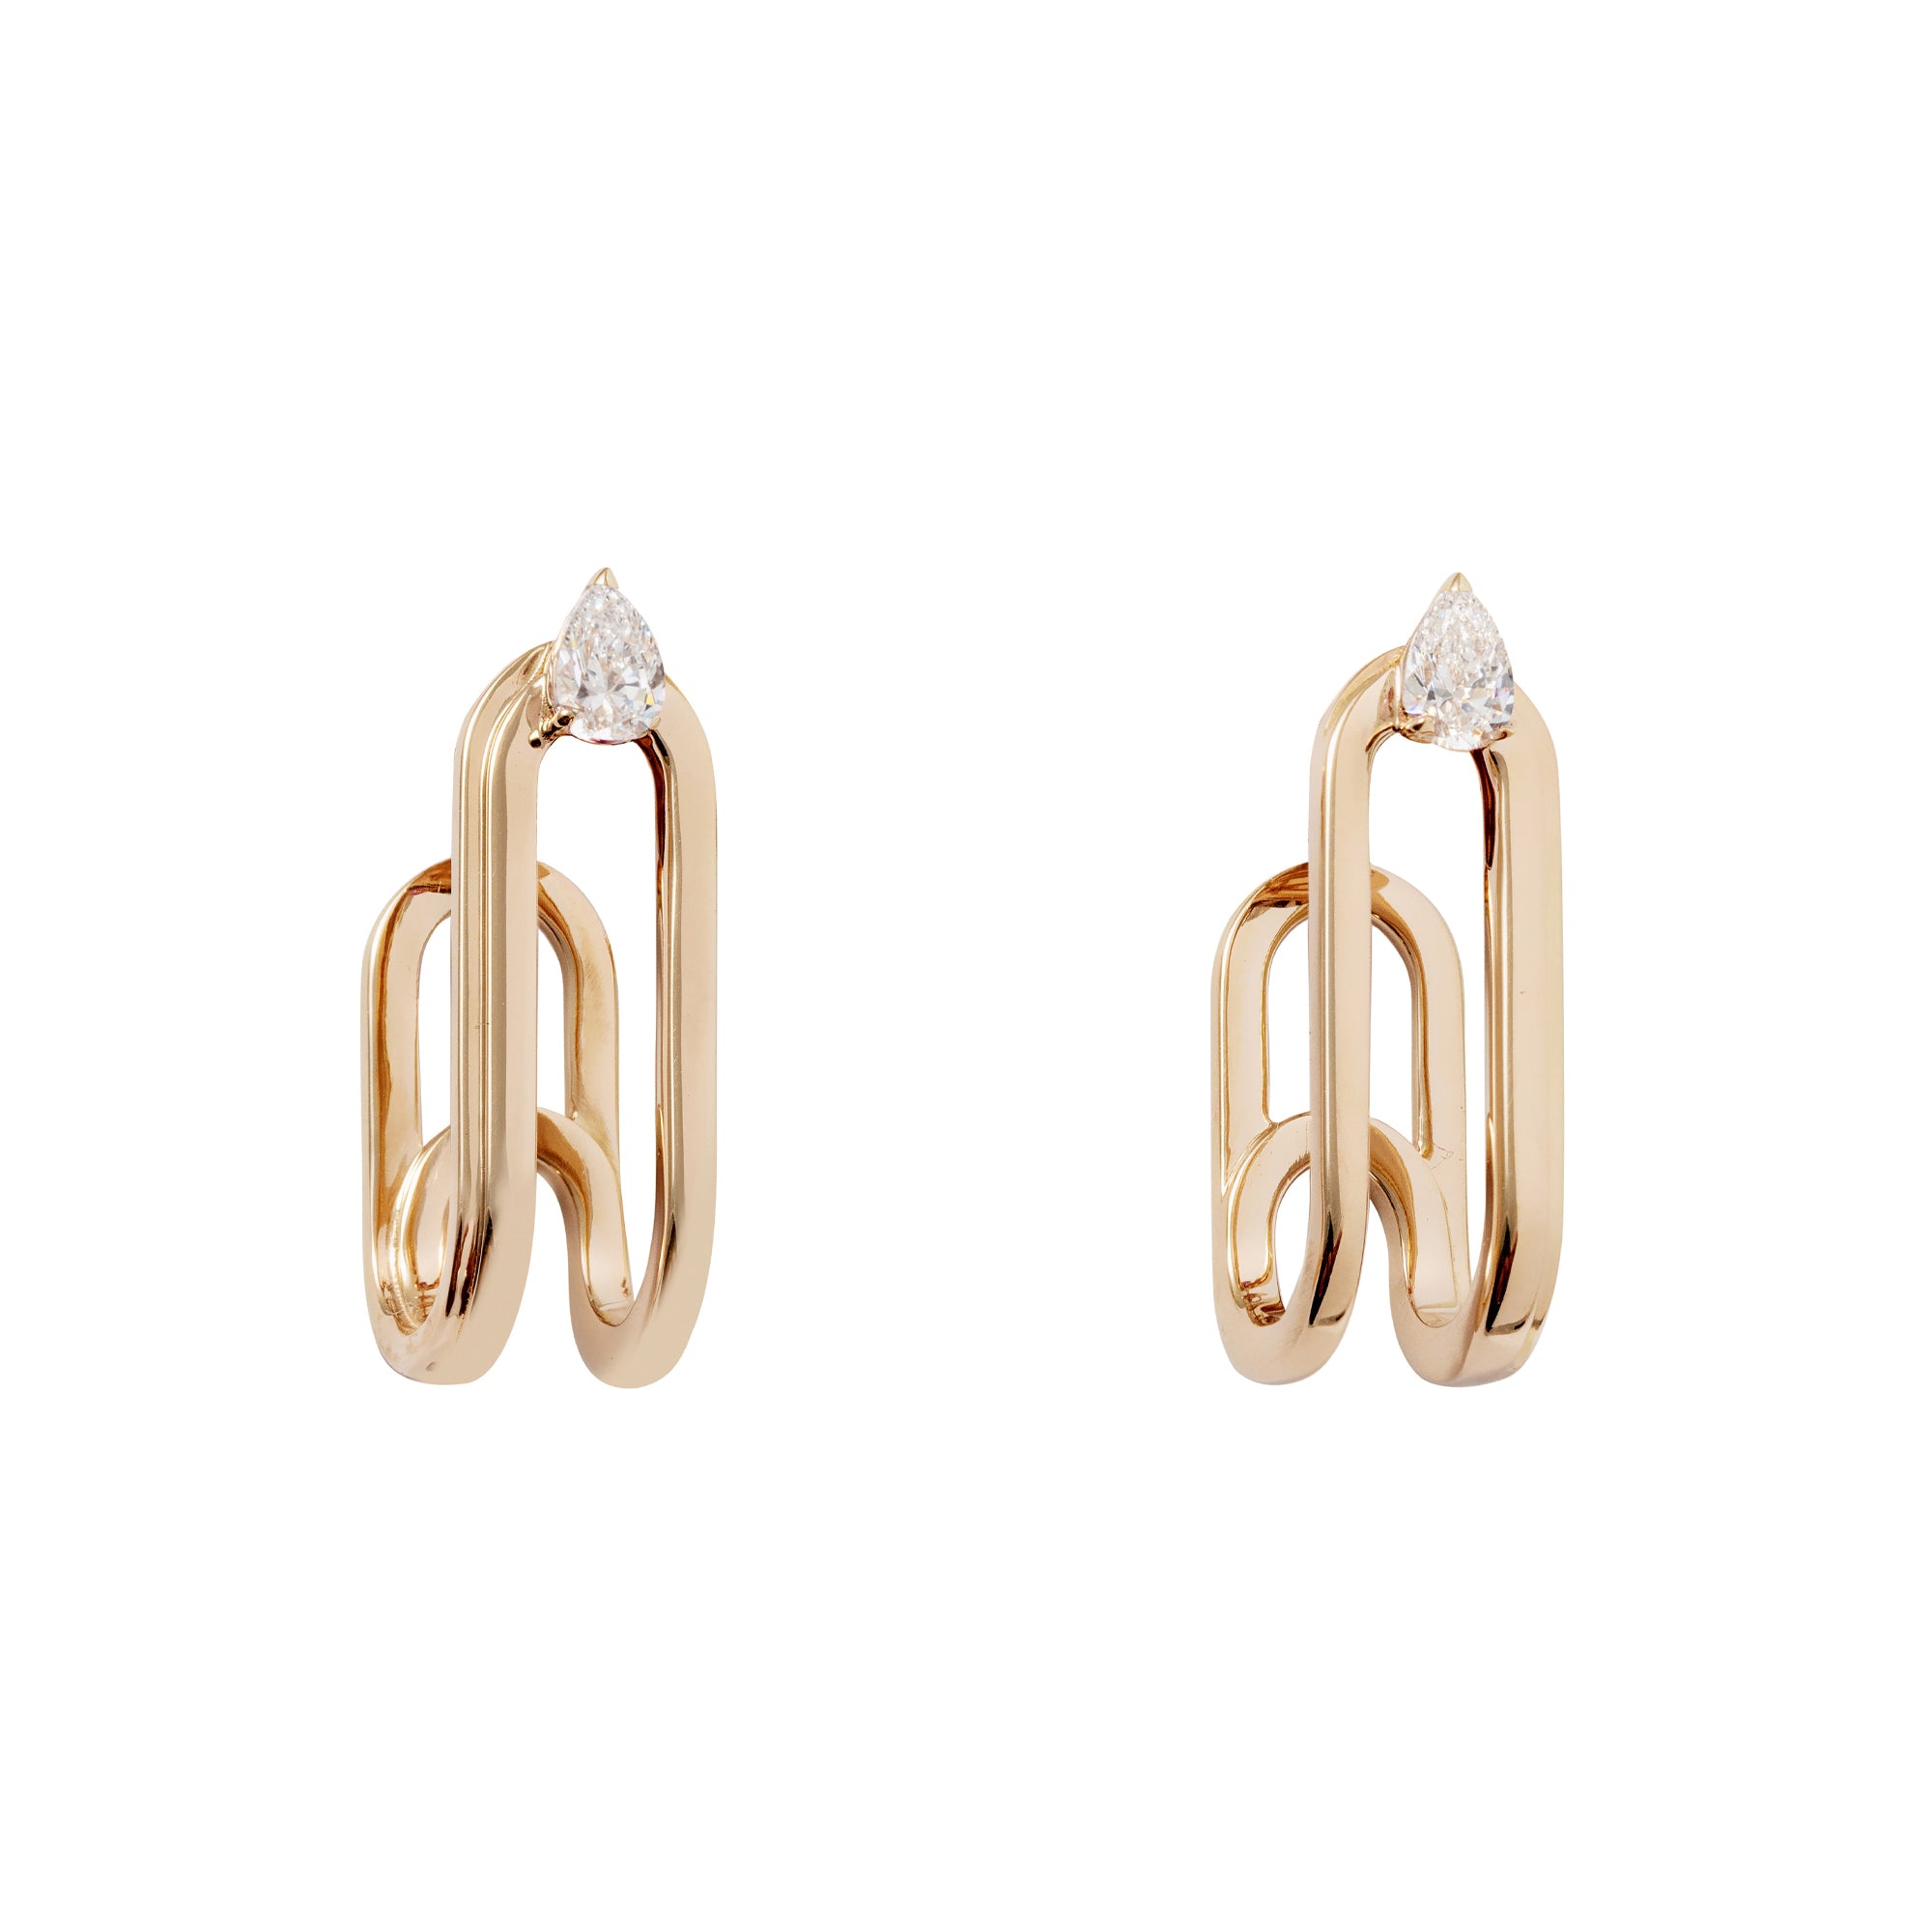 Clip Rose Gold Earrings With Diamonds